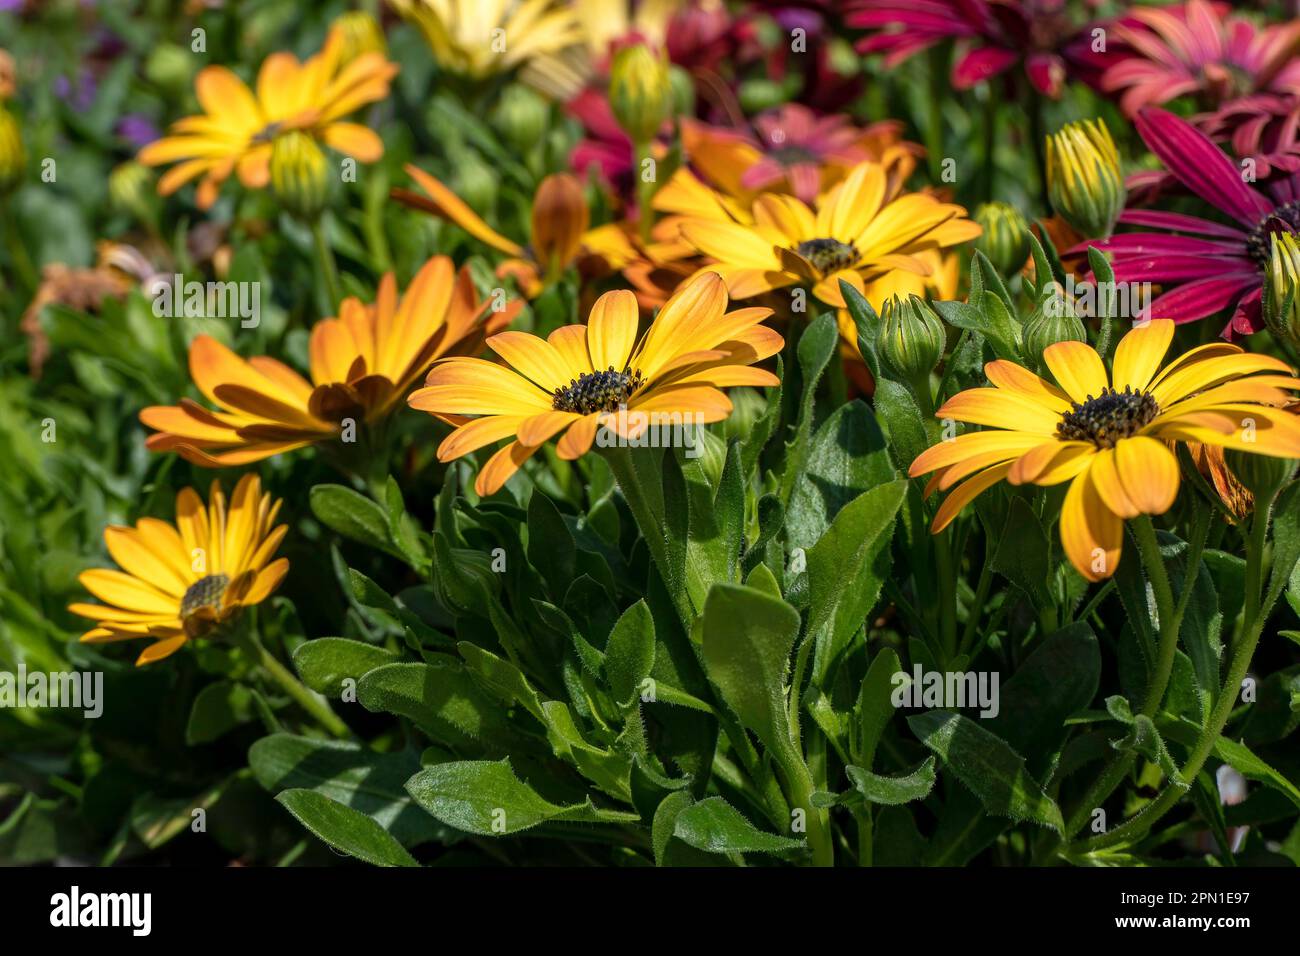 Flowers of yellow garden African daisies close up on a blurred background. Stock Photo